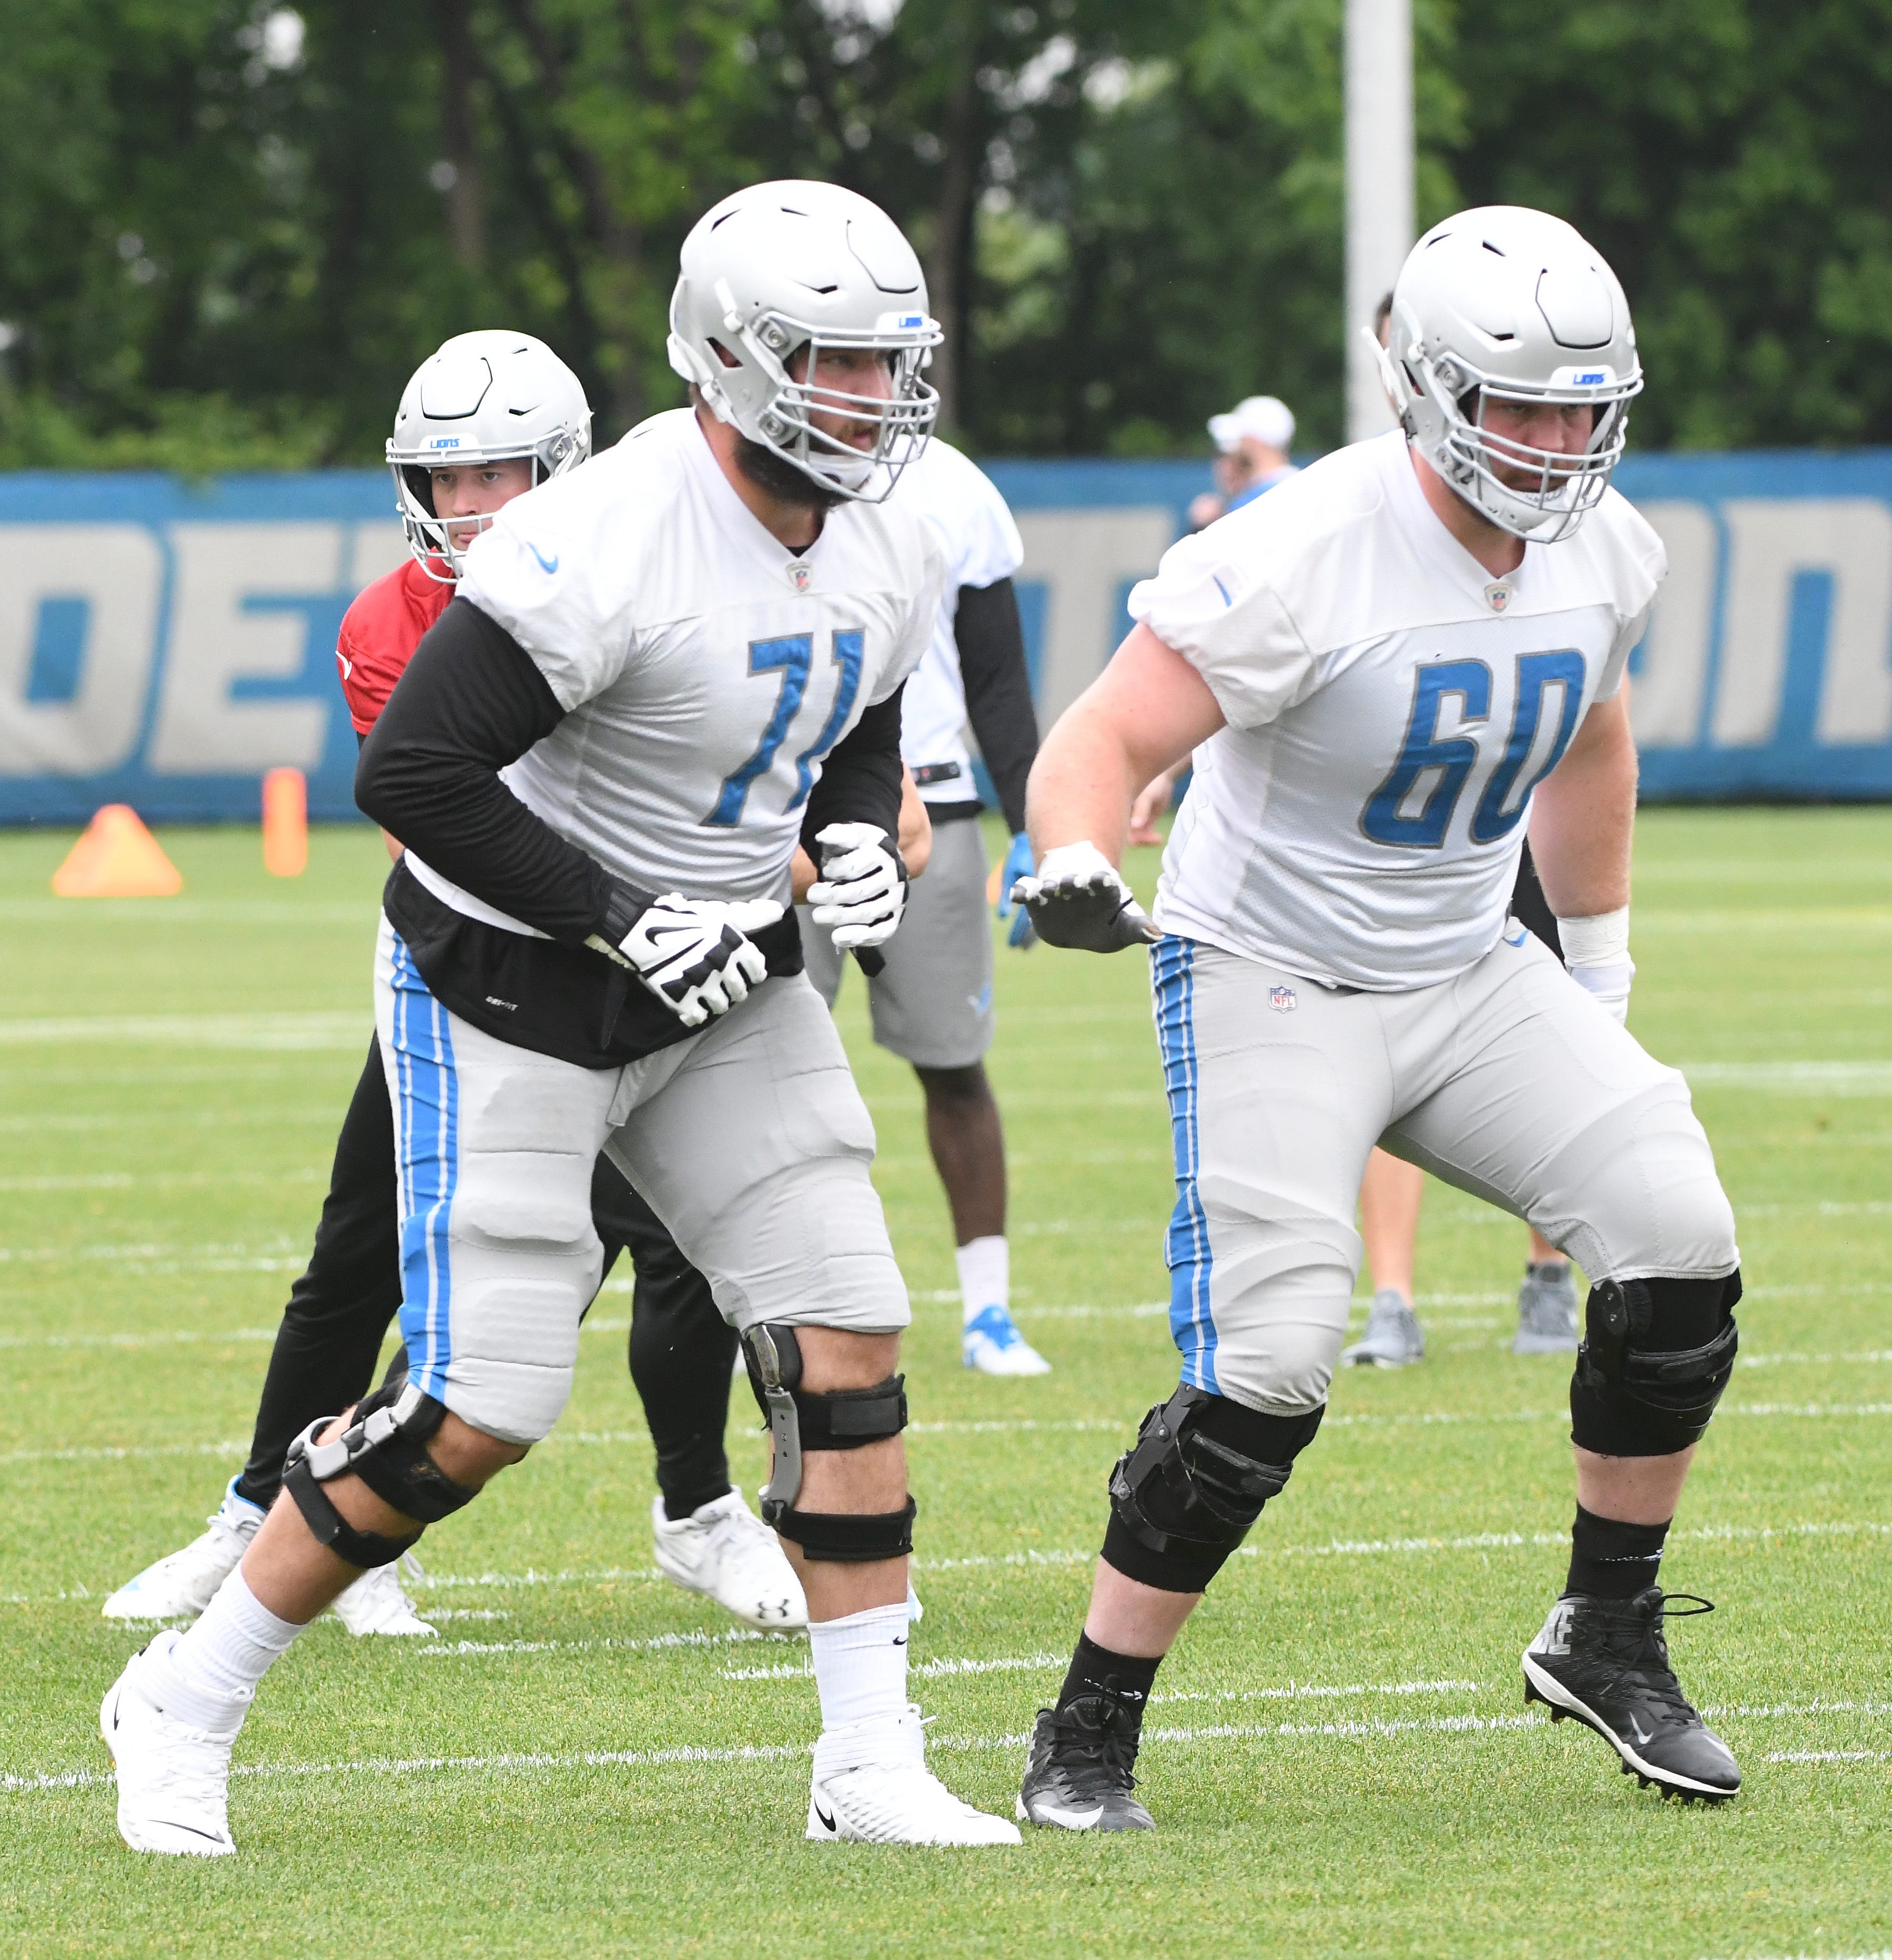 Lions quarterback Matthew Stafford in the pocket behind linemen Rick Wagner and Graham Glasgow during drills.